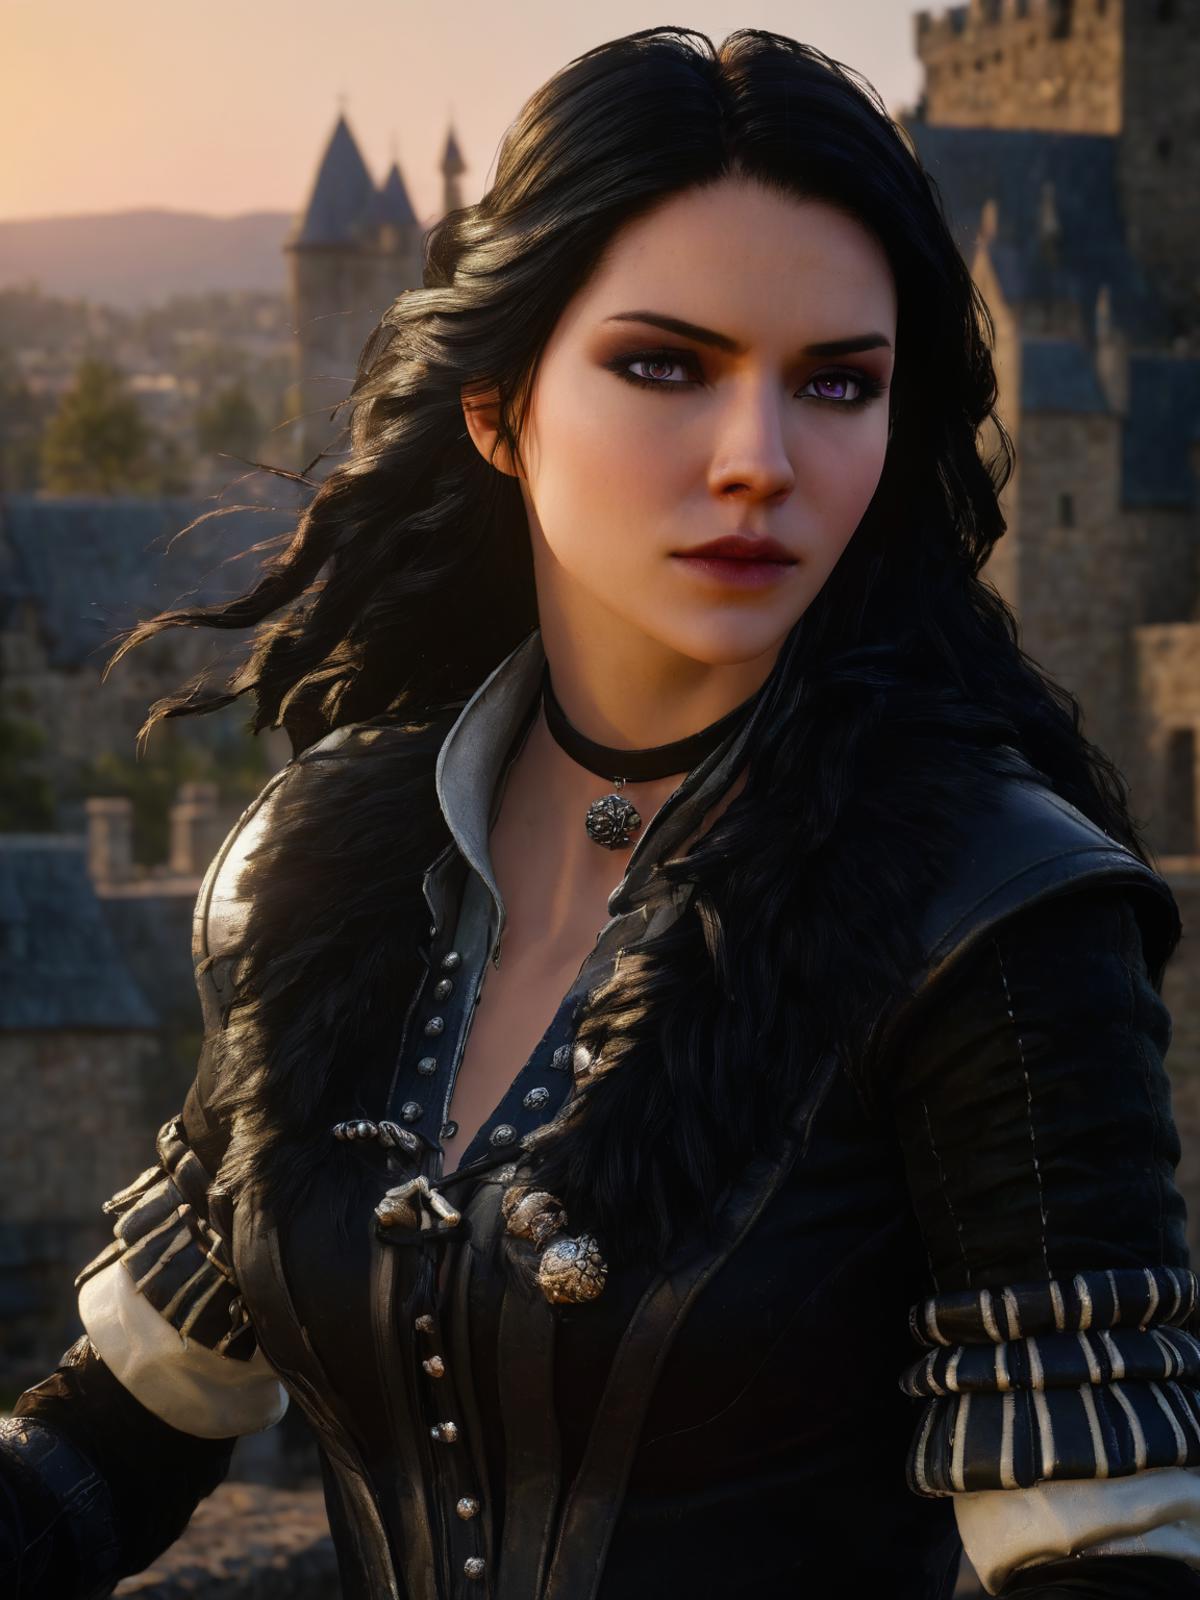 Yennefer (Witcher 3 Game) SDXL image by echo_cipher